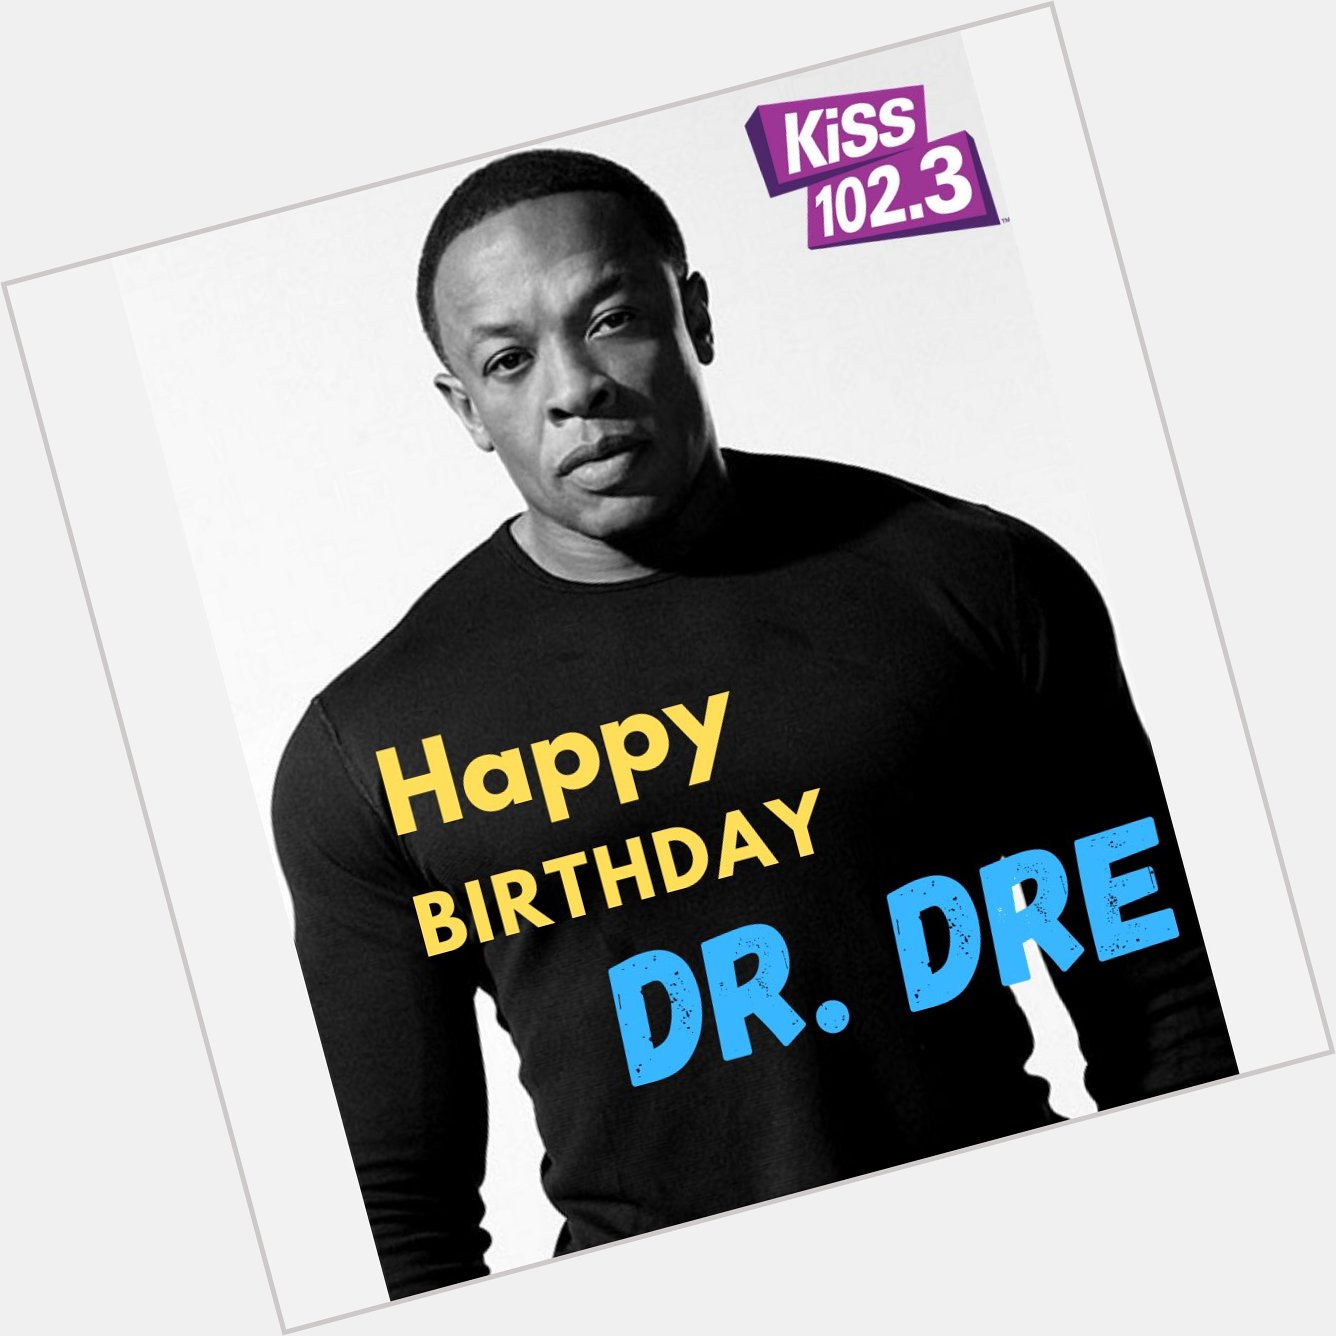 Happy Birthday to one of my favs! Dr. Dre turns 56 today! - Sarah Nick 